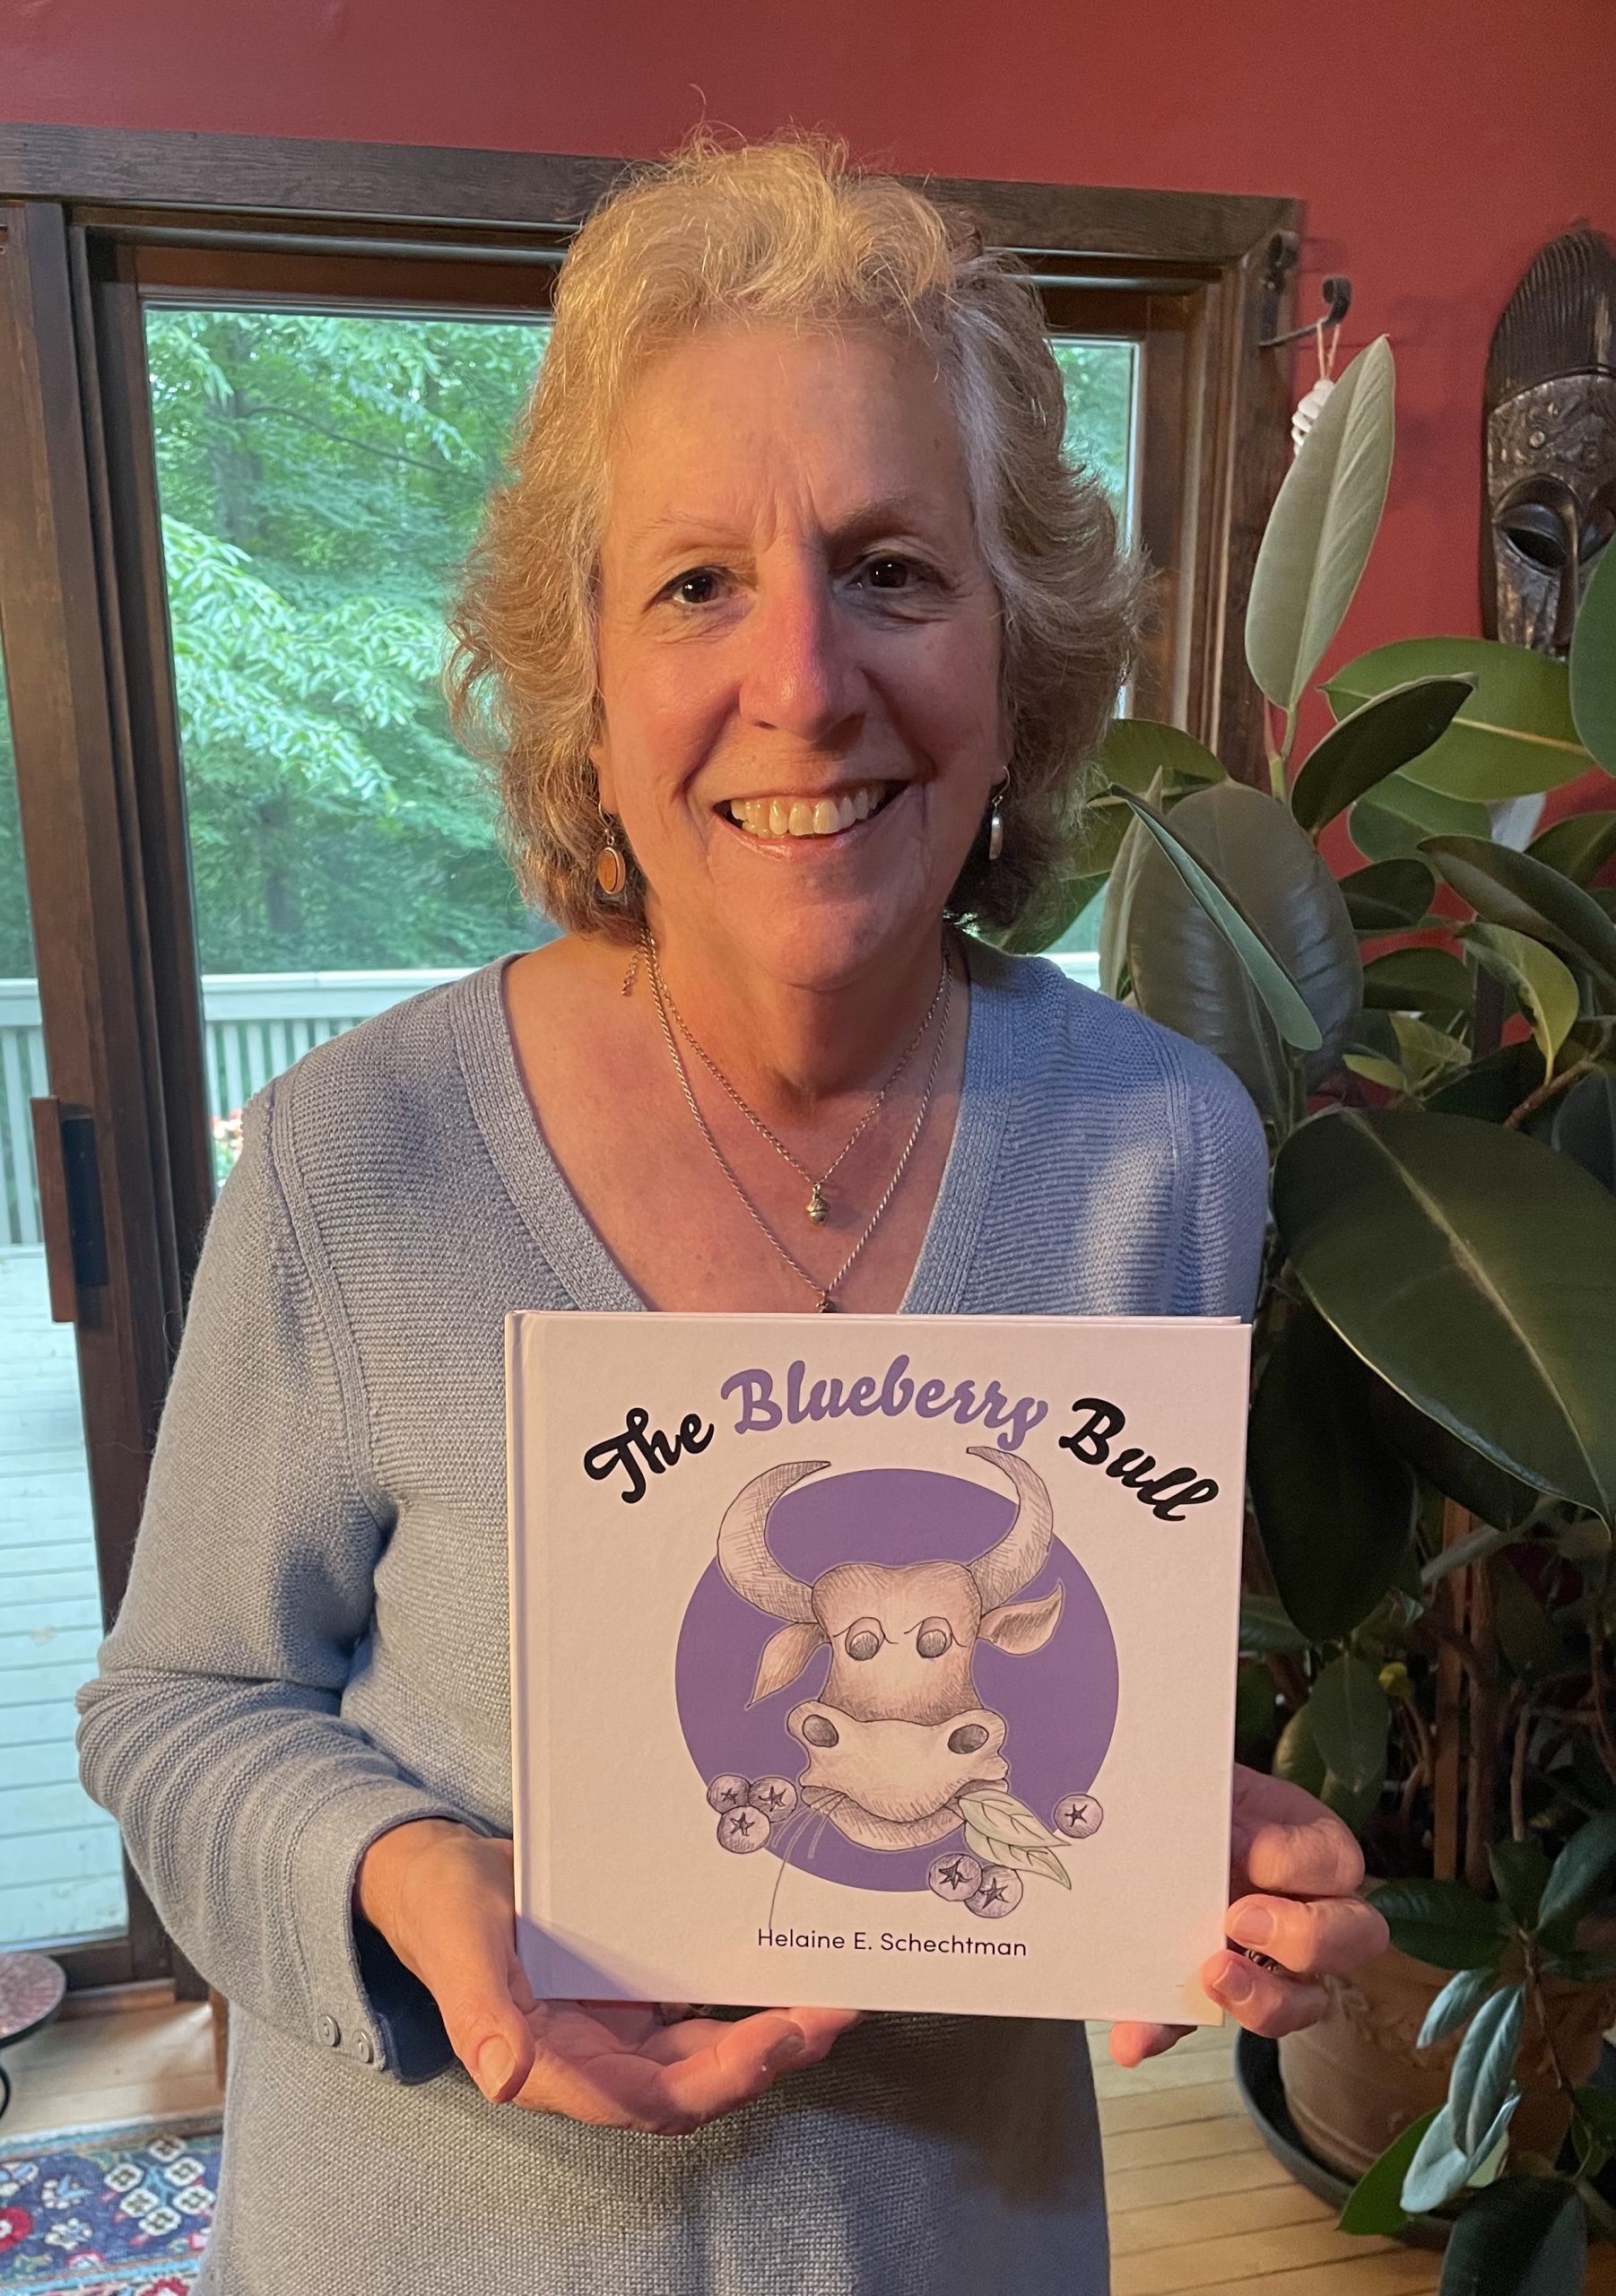 Helaine Schechtman, author of The Blueberry Bull, is pictured holding her book